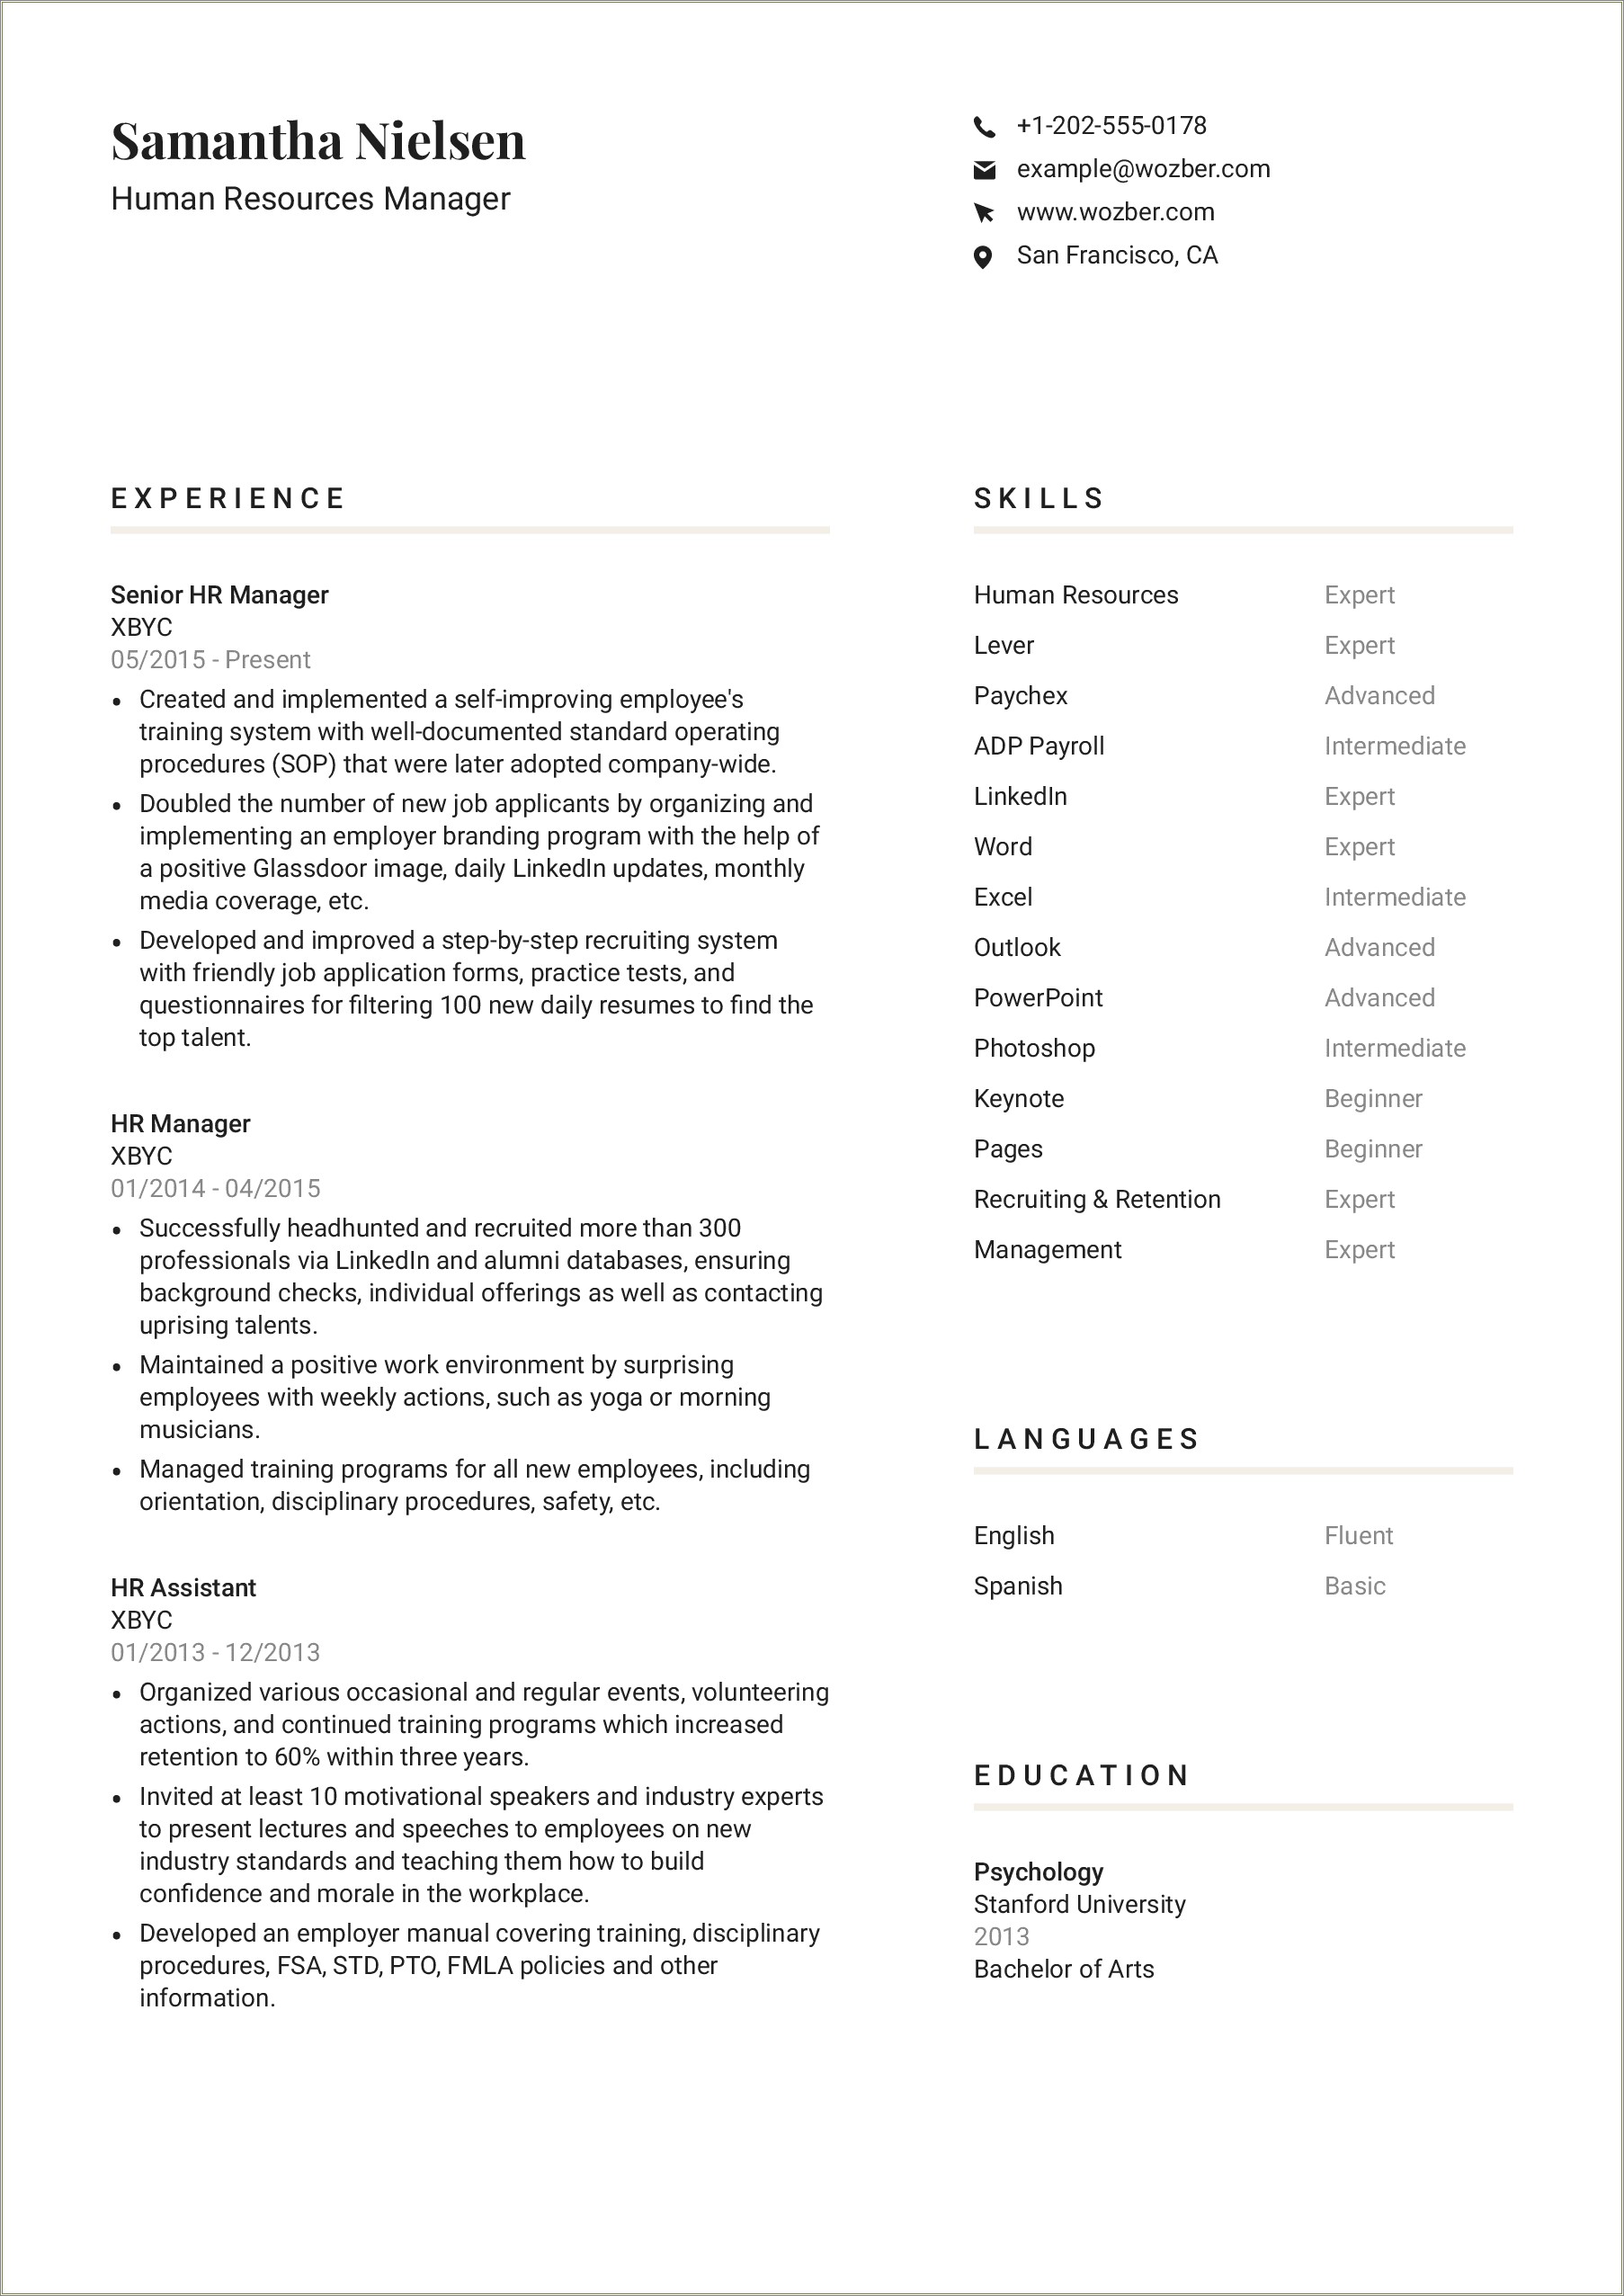 Payroll Resume For School District Position